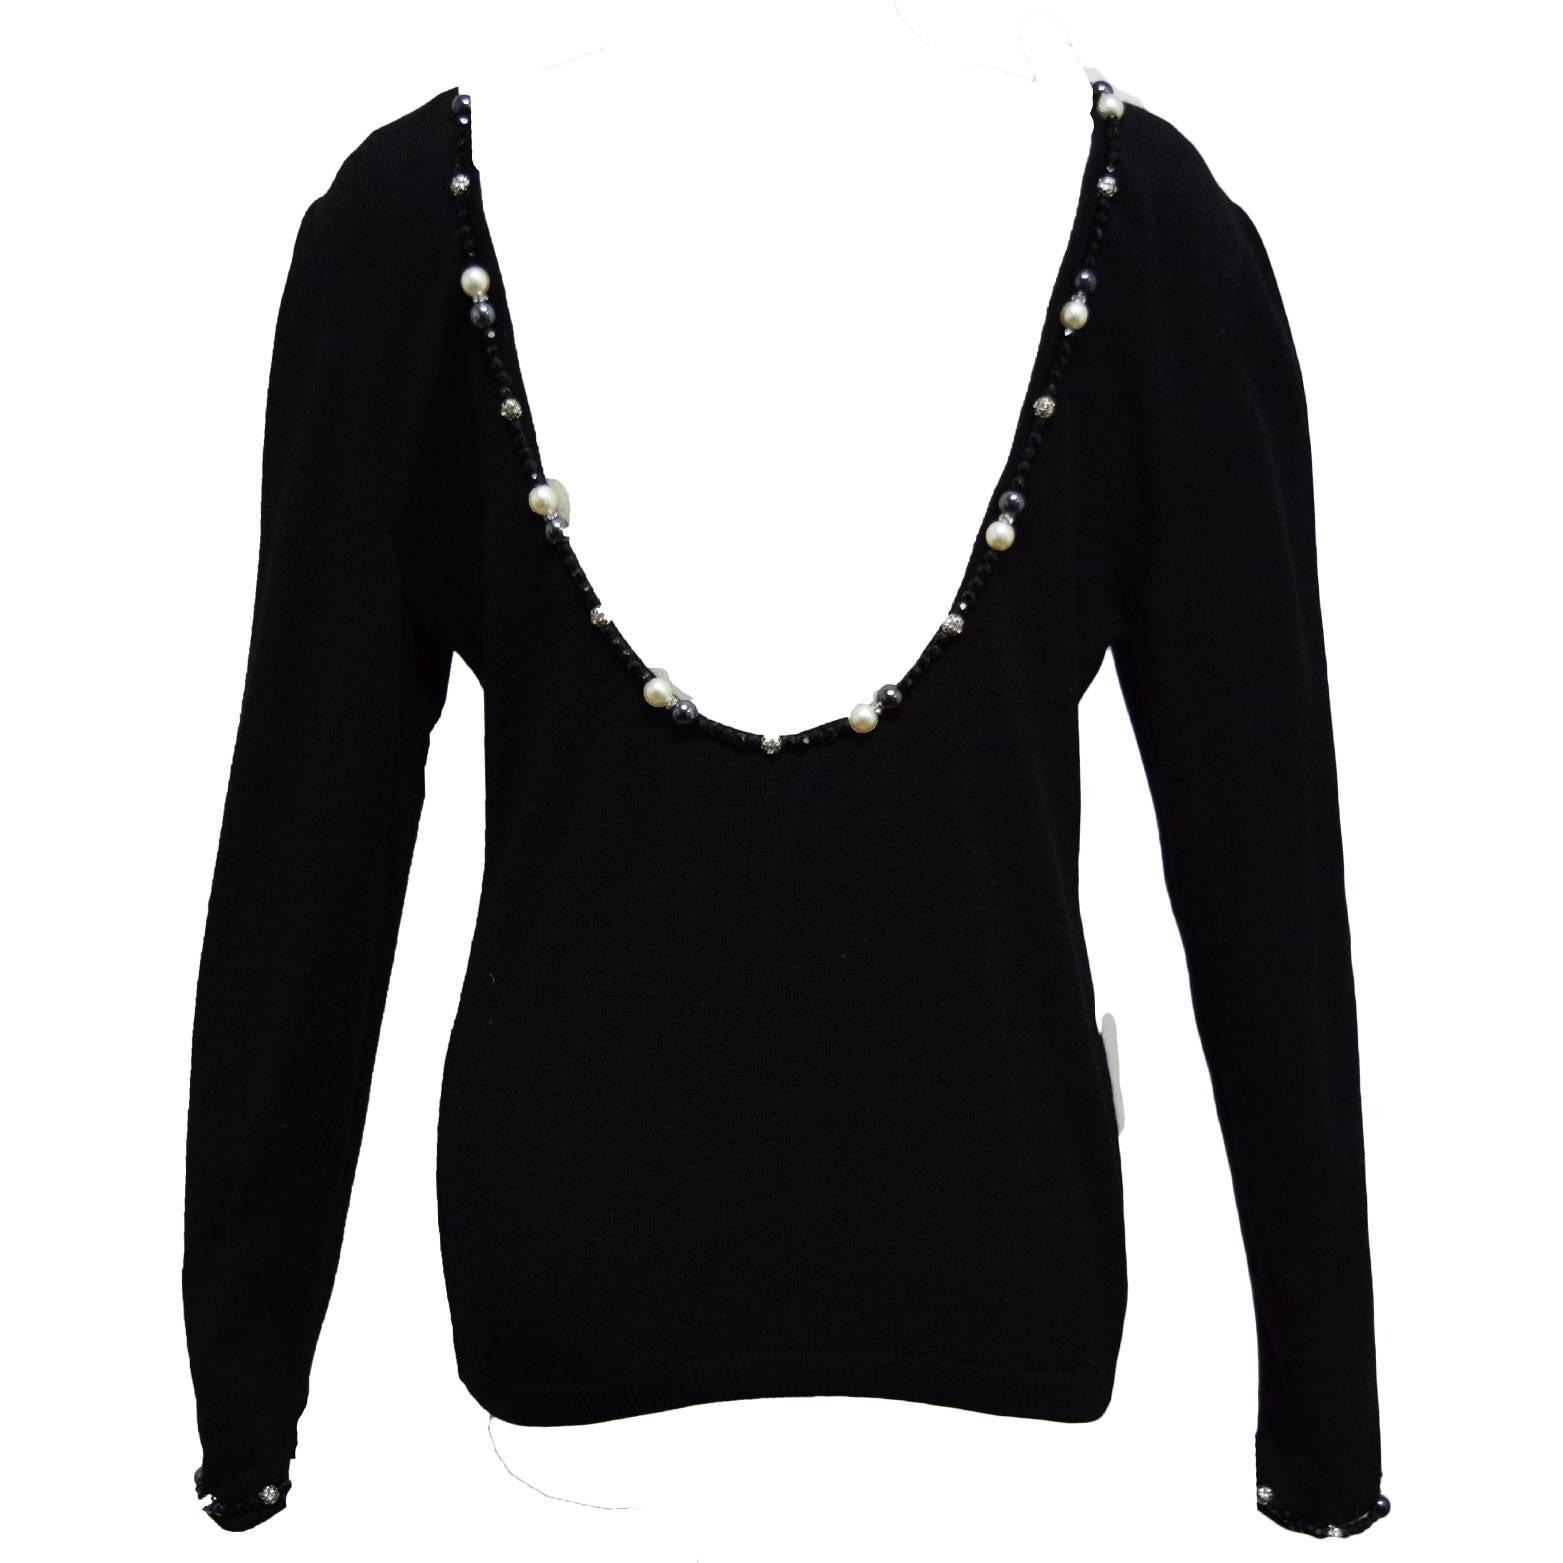 Valentino Night Black Wool Low Back Evening Sweater, Trimmed with Black Faceted Jets, Pearls, Hematite, Metal with Rhinestones beads all around the neckline and back along with the hem of the sleeves.